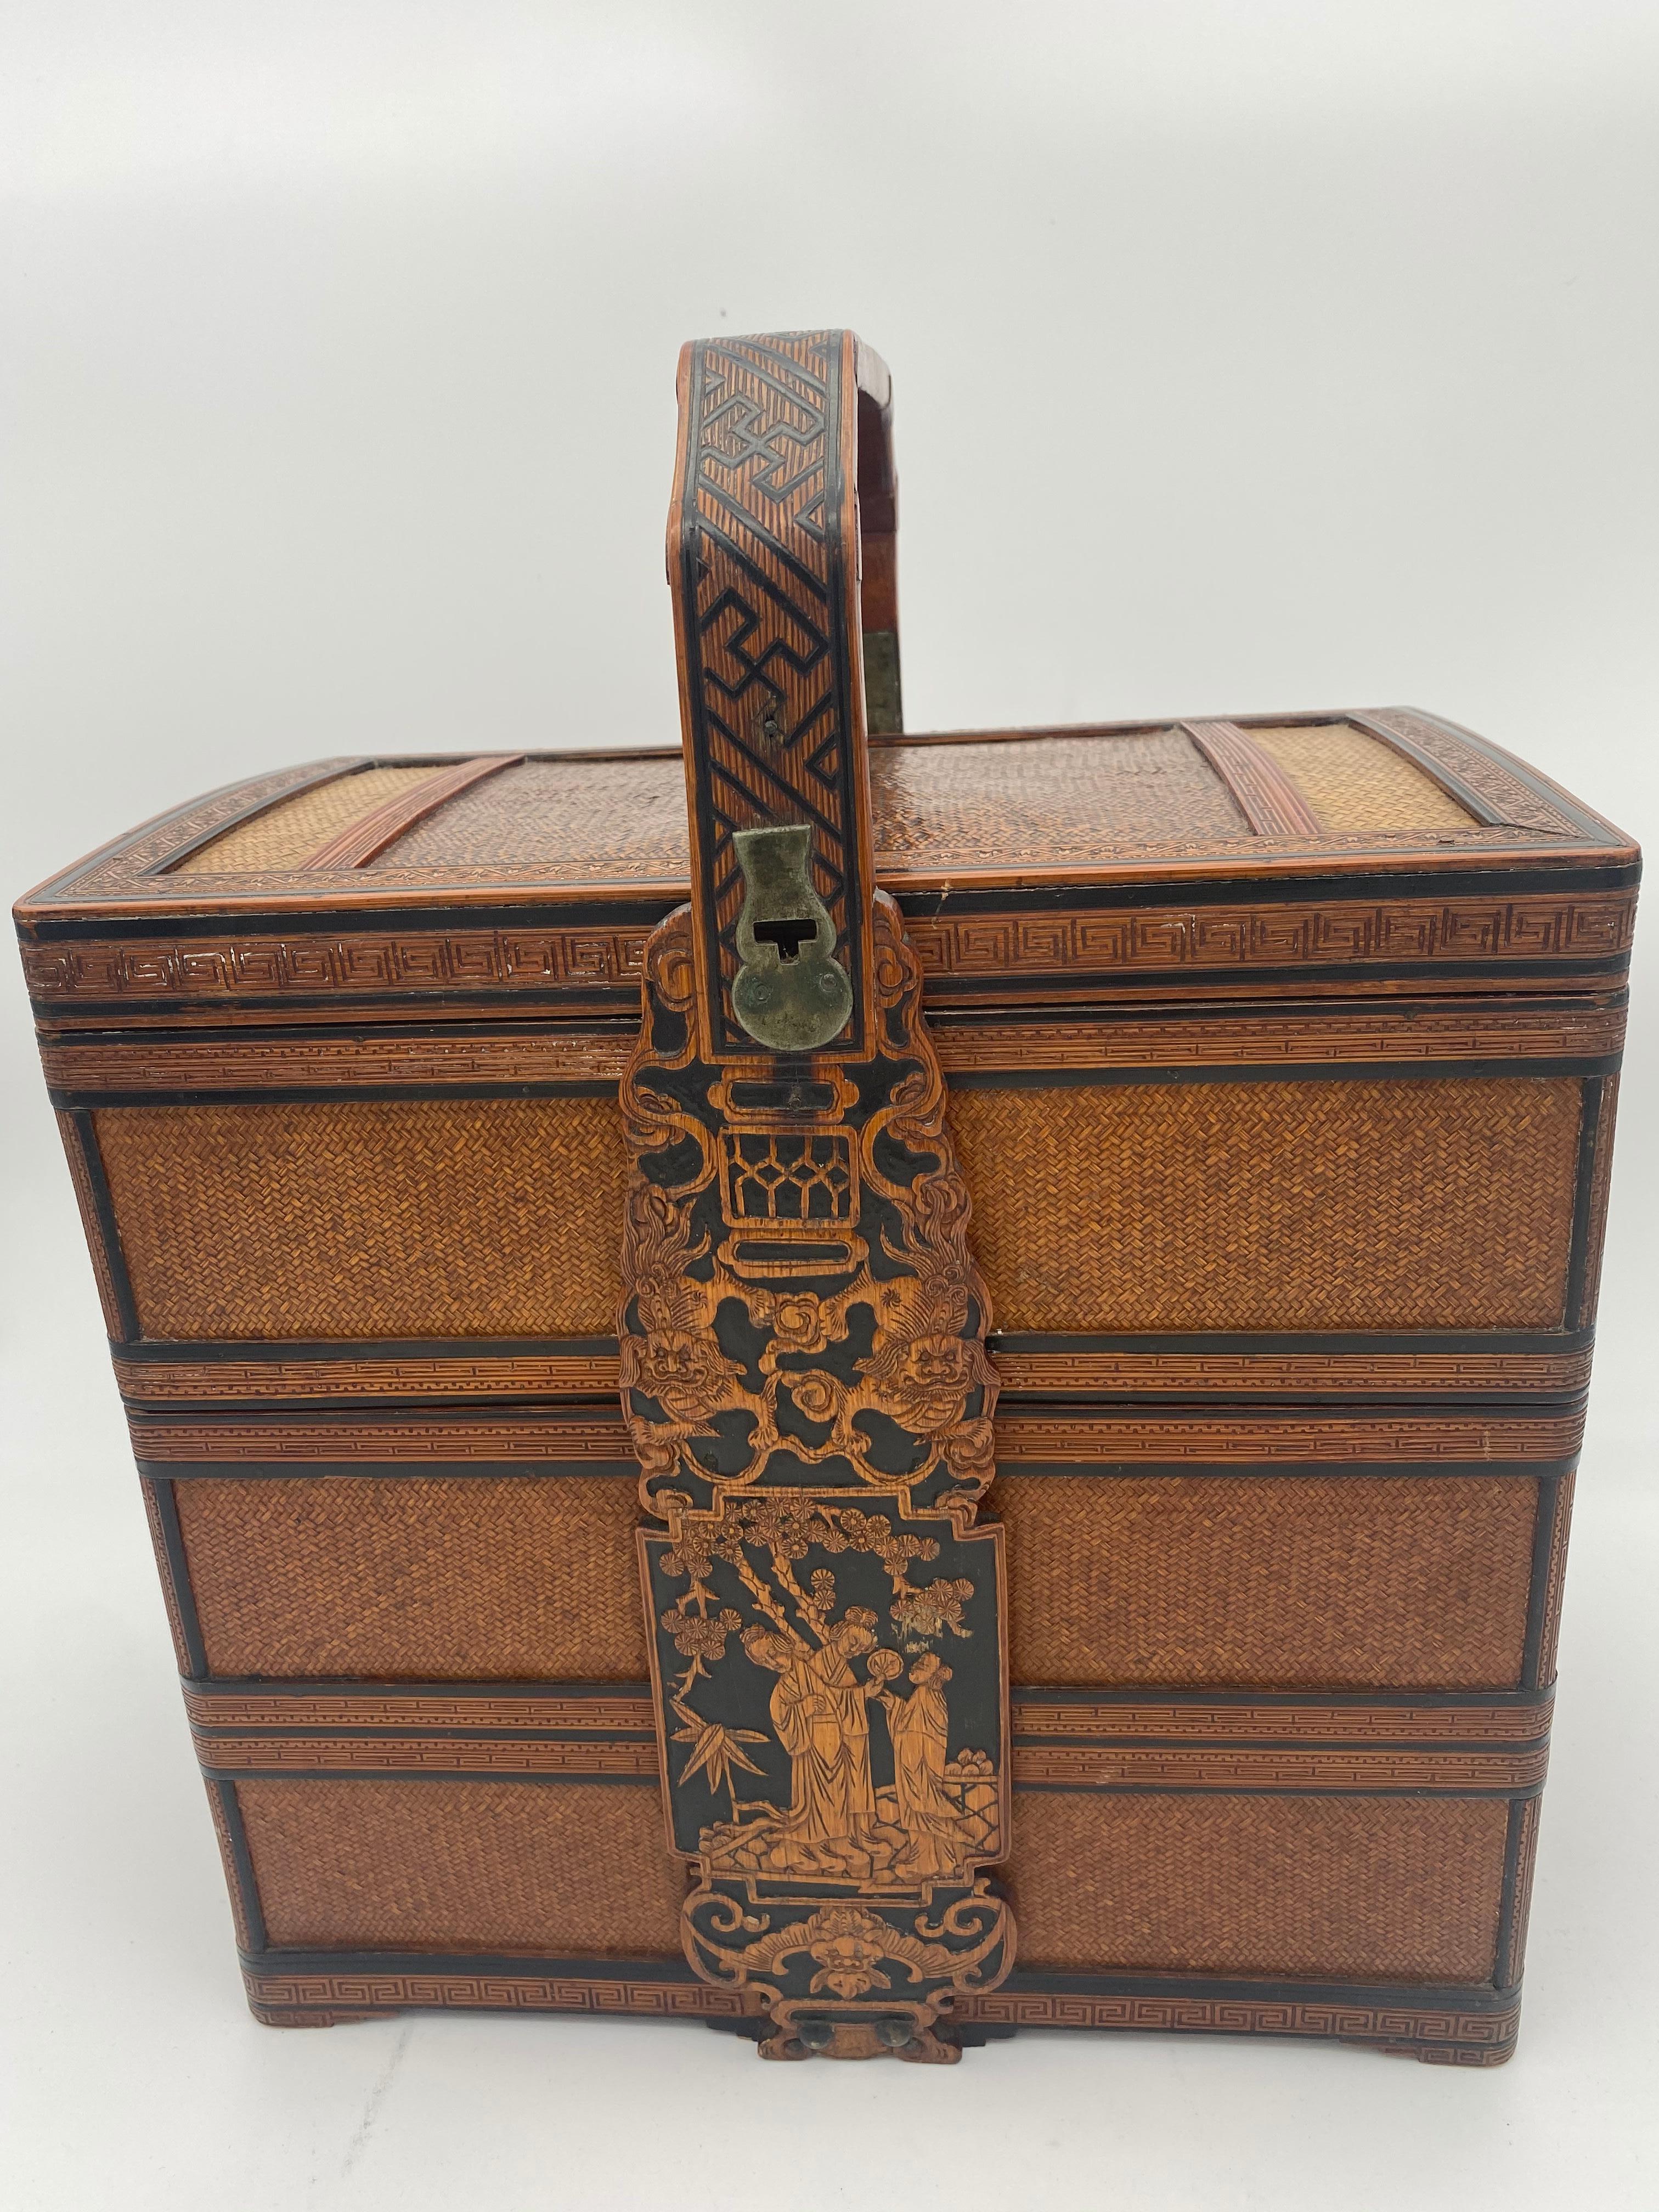 Antique 19th century Chinese stacked snack box. Decorated all-over with intricate designs and handle connects to depiction of family under a tree. Height of box without handle is 10 inches.